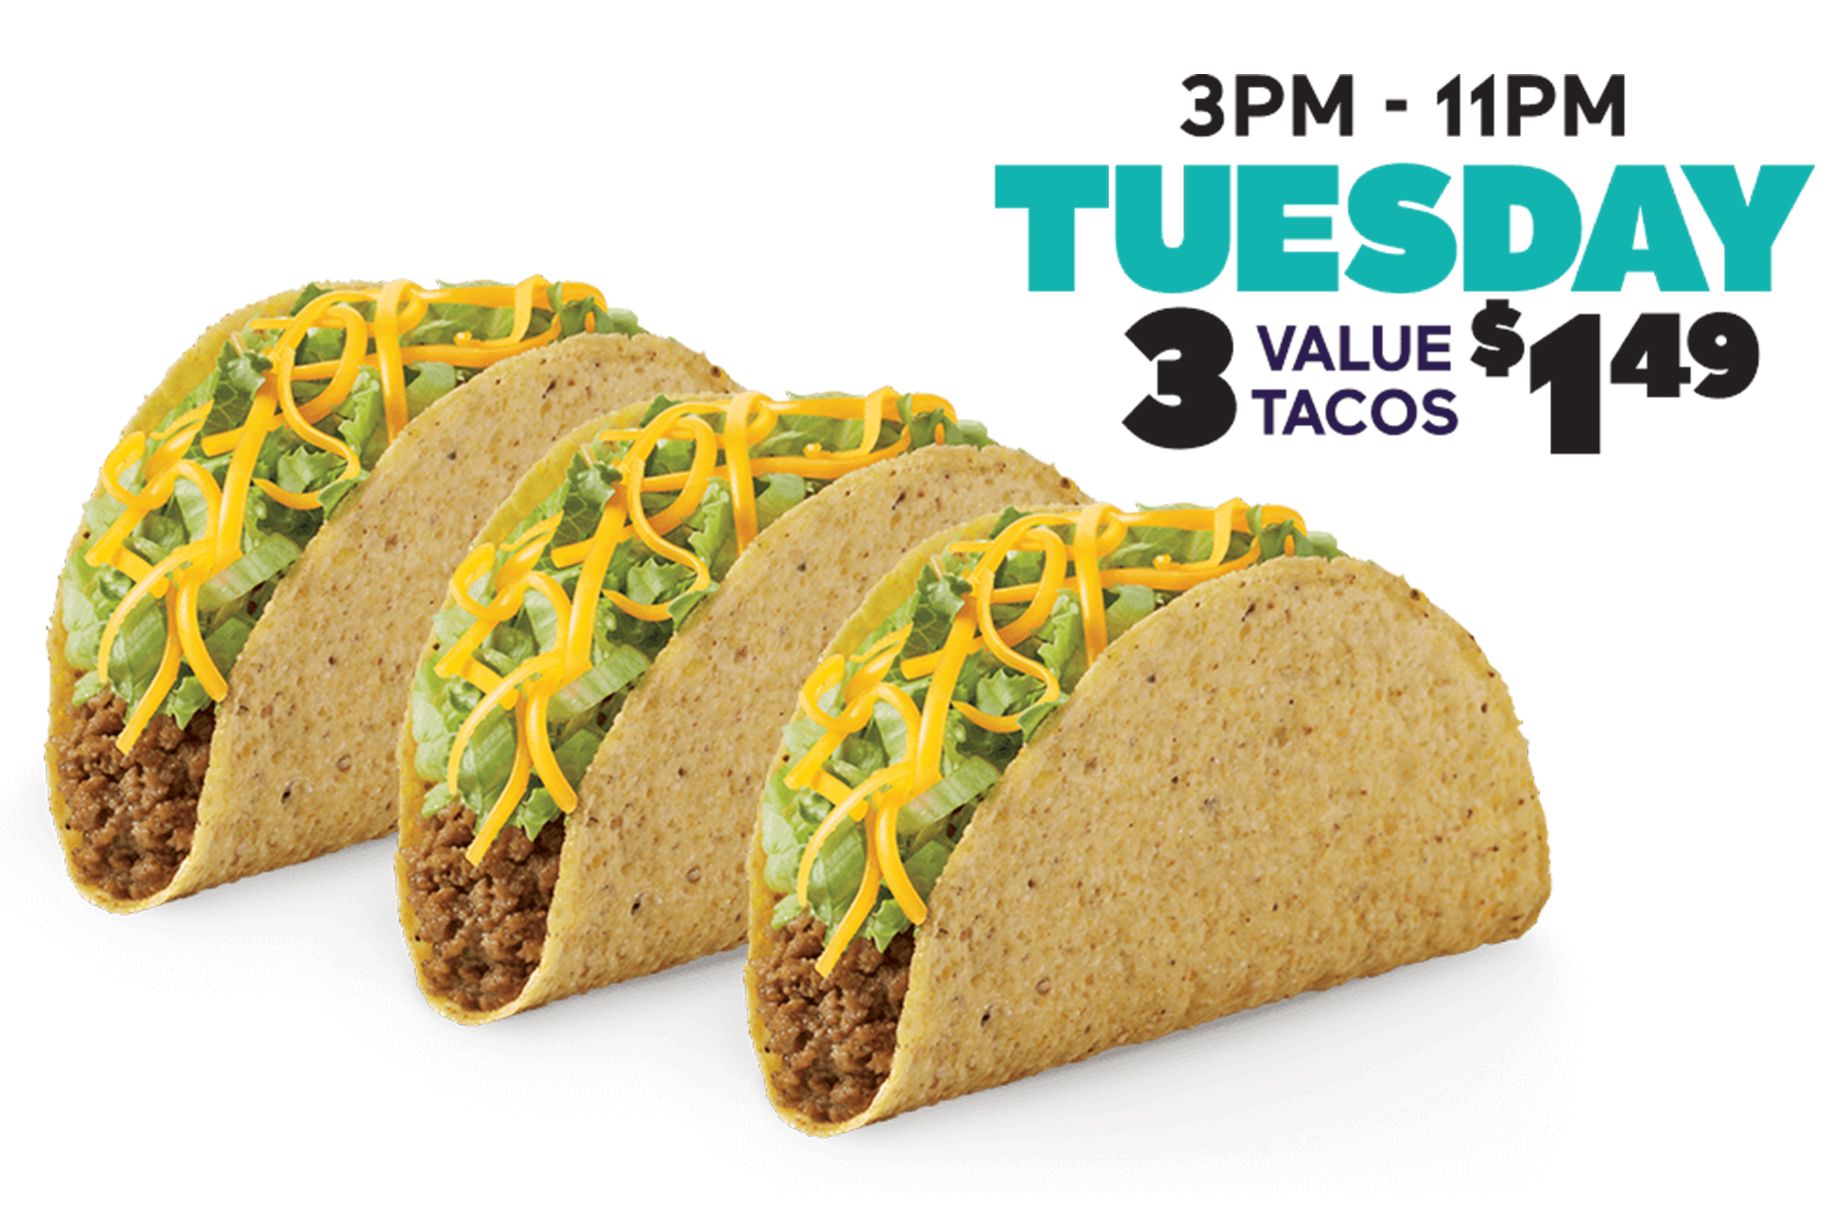 Every Tuesday from 3 to 11 pm Get 3 Value Tacos for $1.49 at Participating Del Taco Restaurants